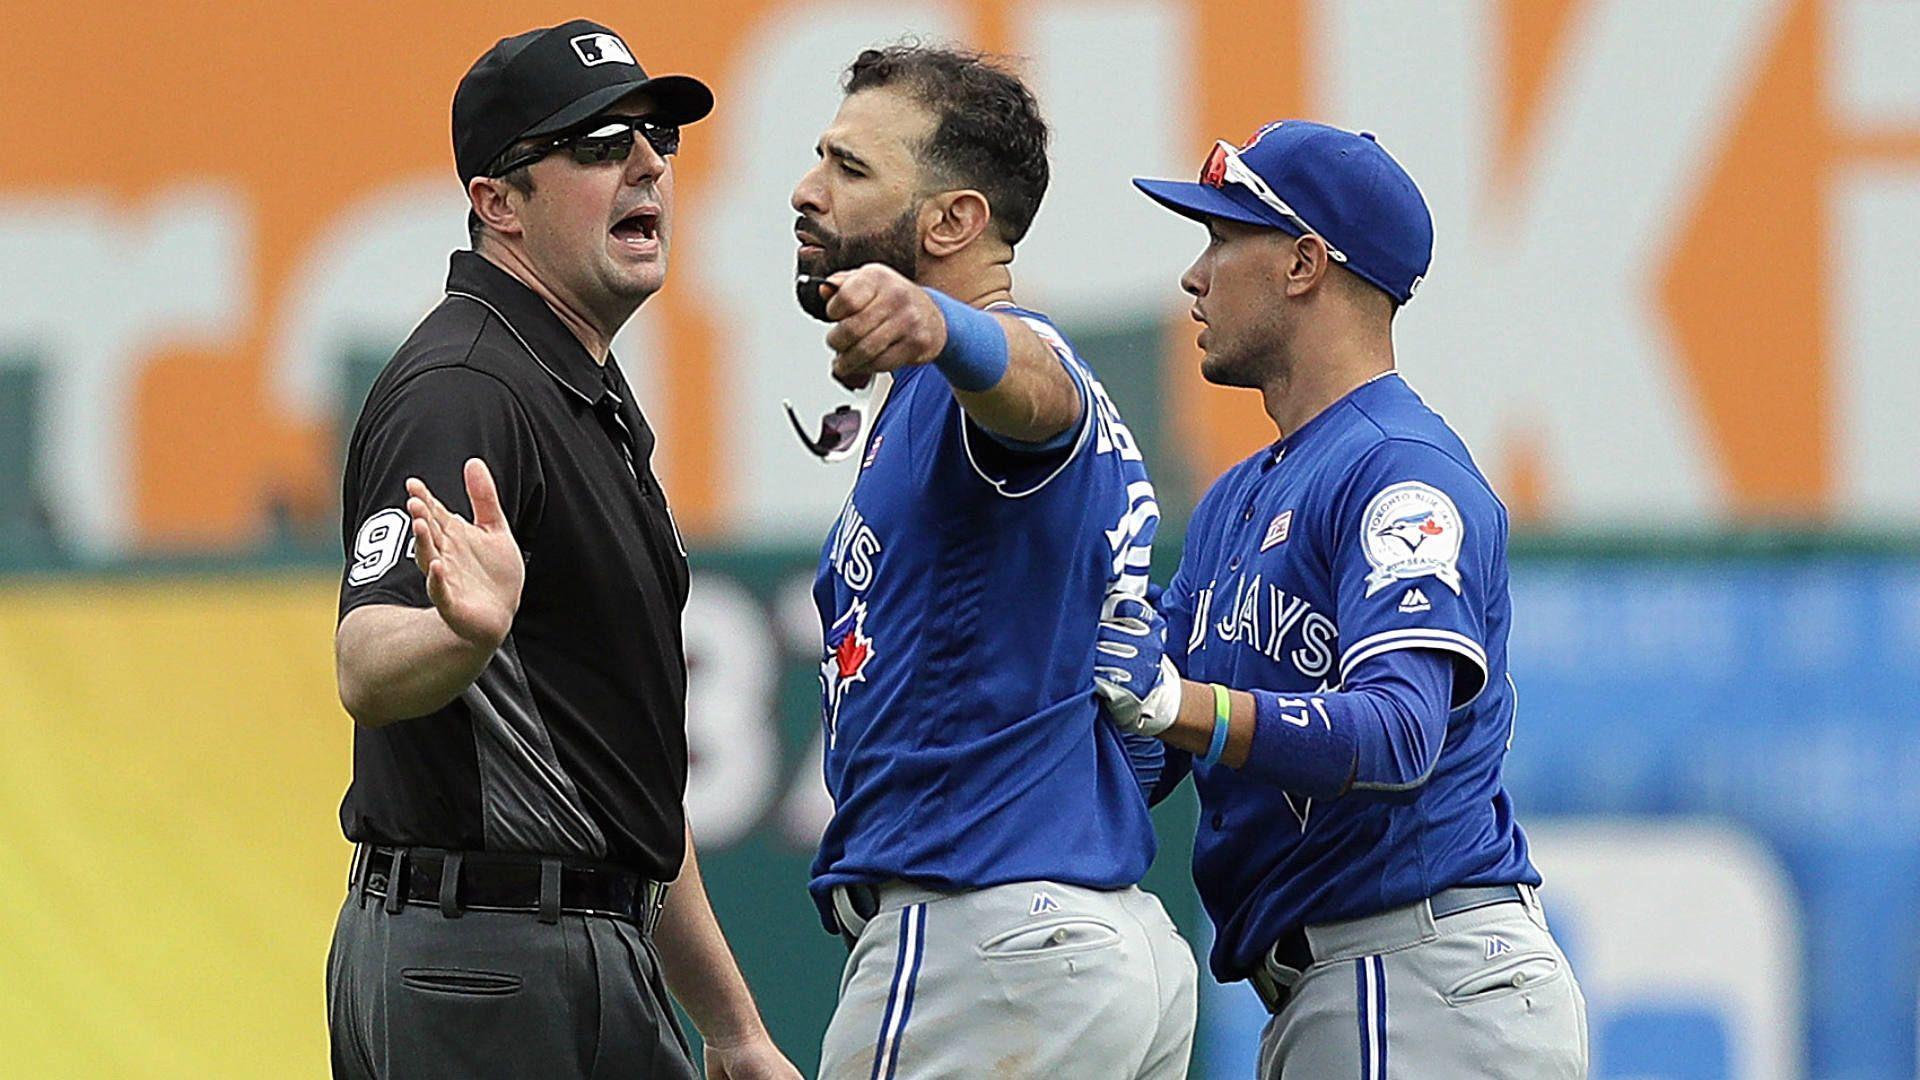 MLB suspends Jose Bautista for fight with Rougned Odor, postgame